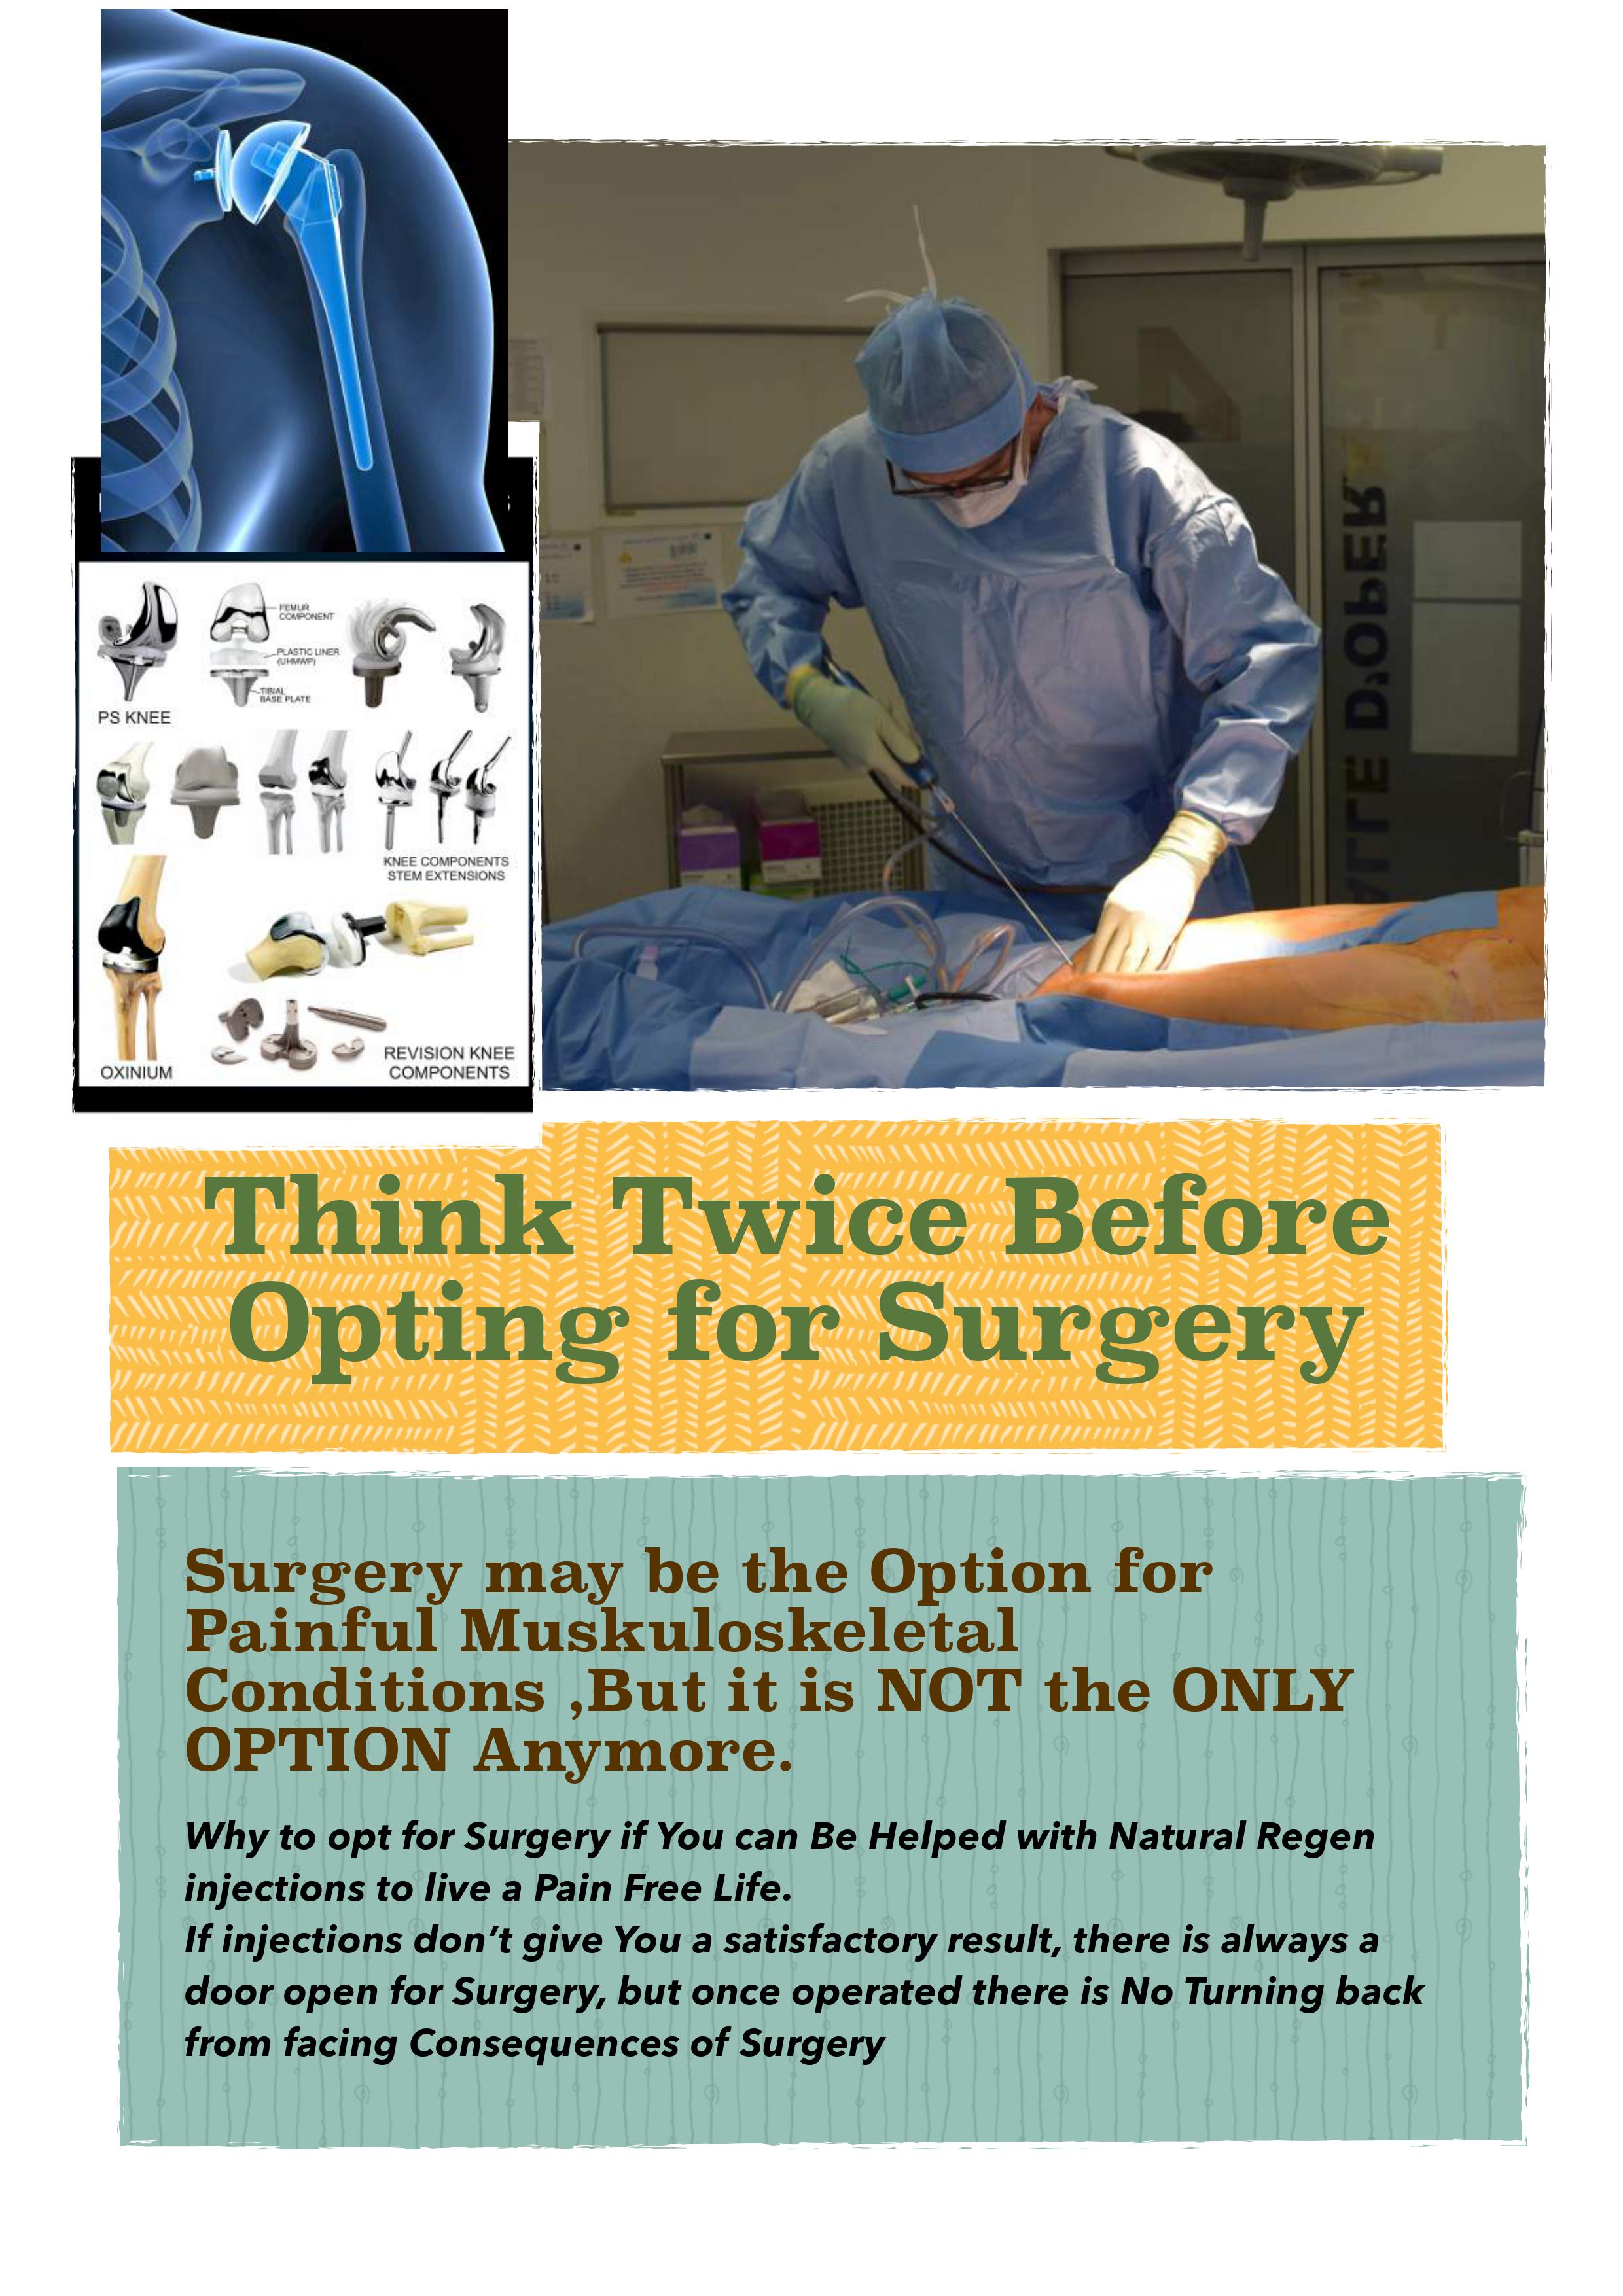 think twice before surgery